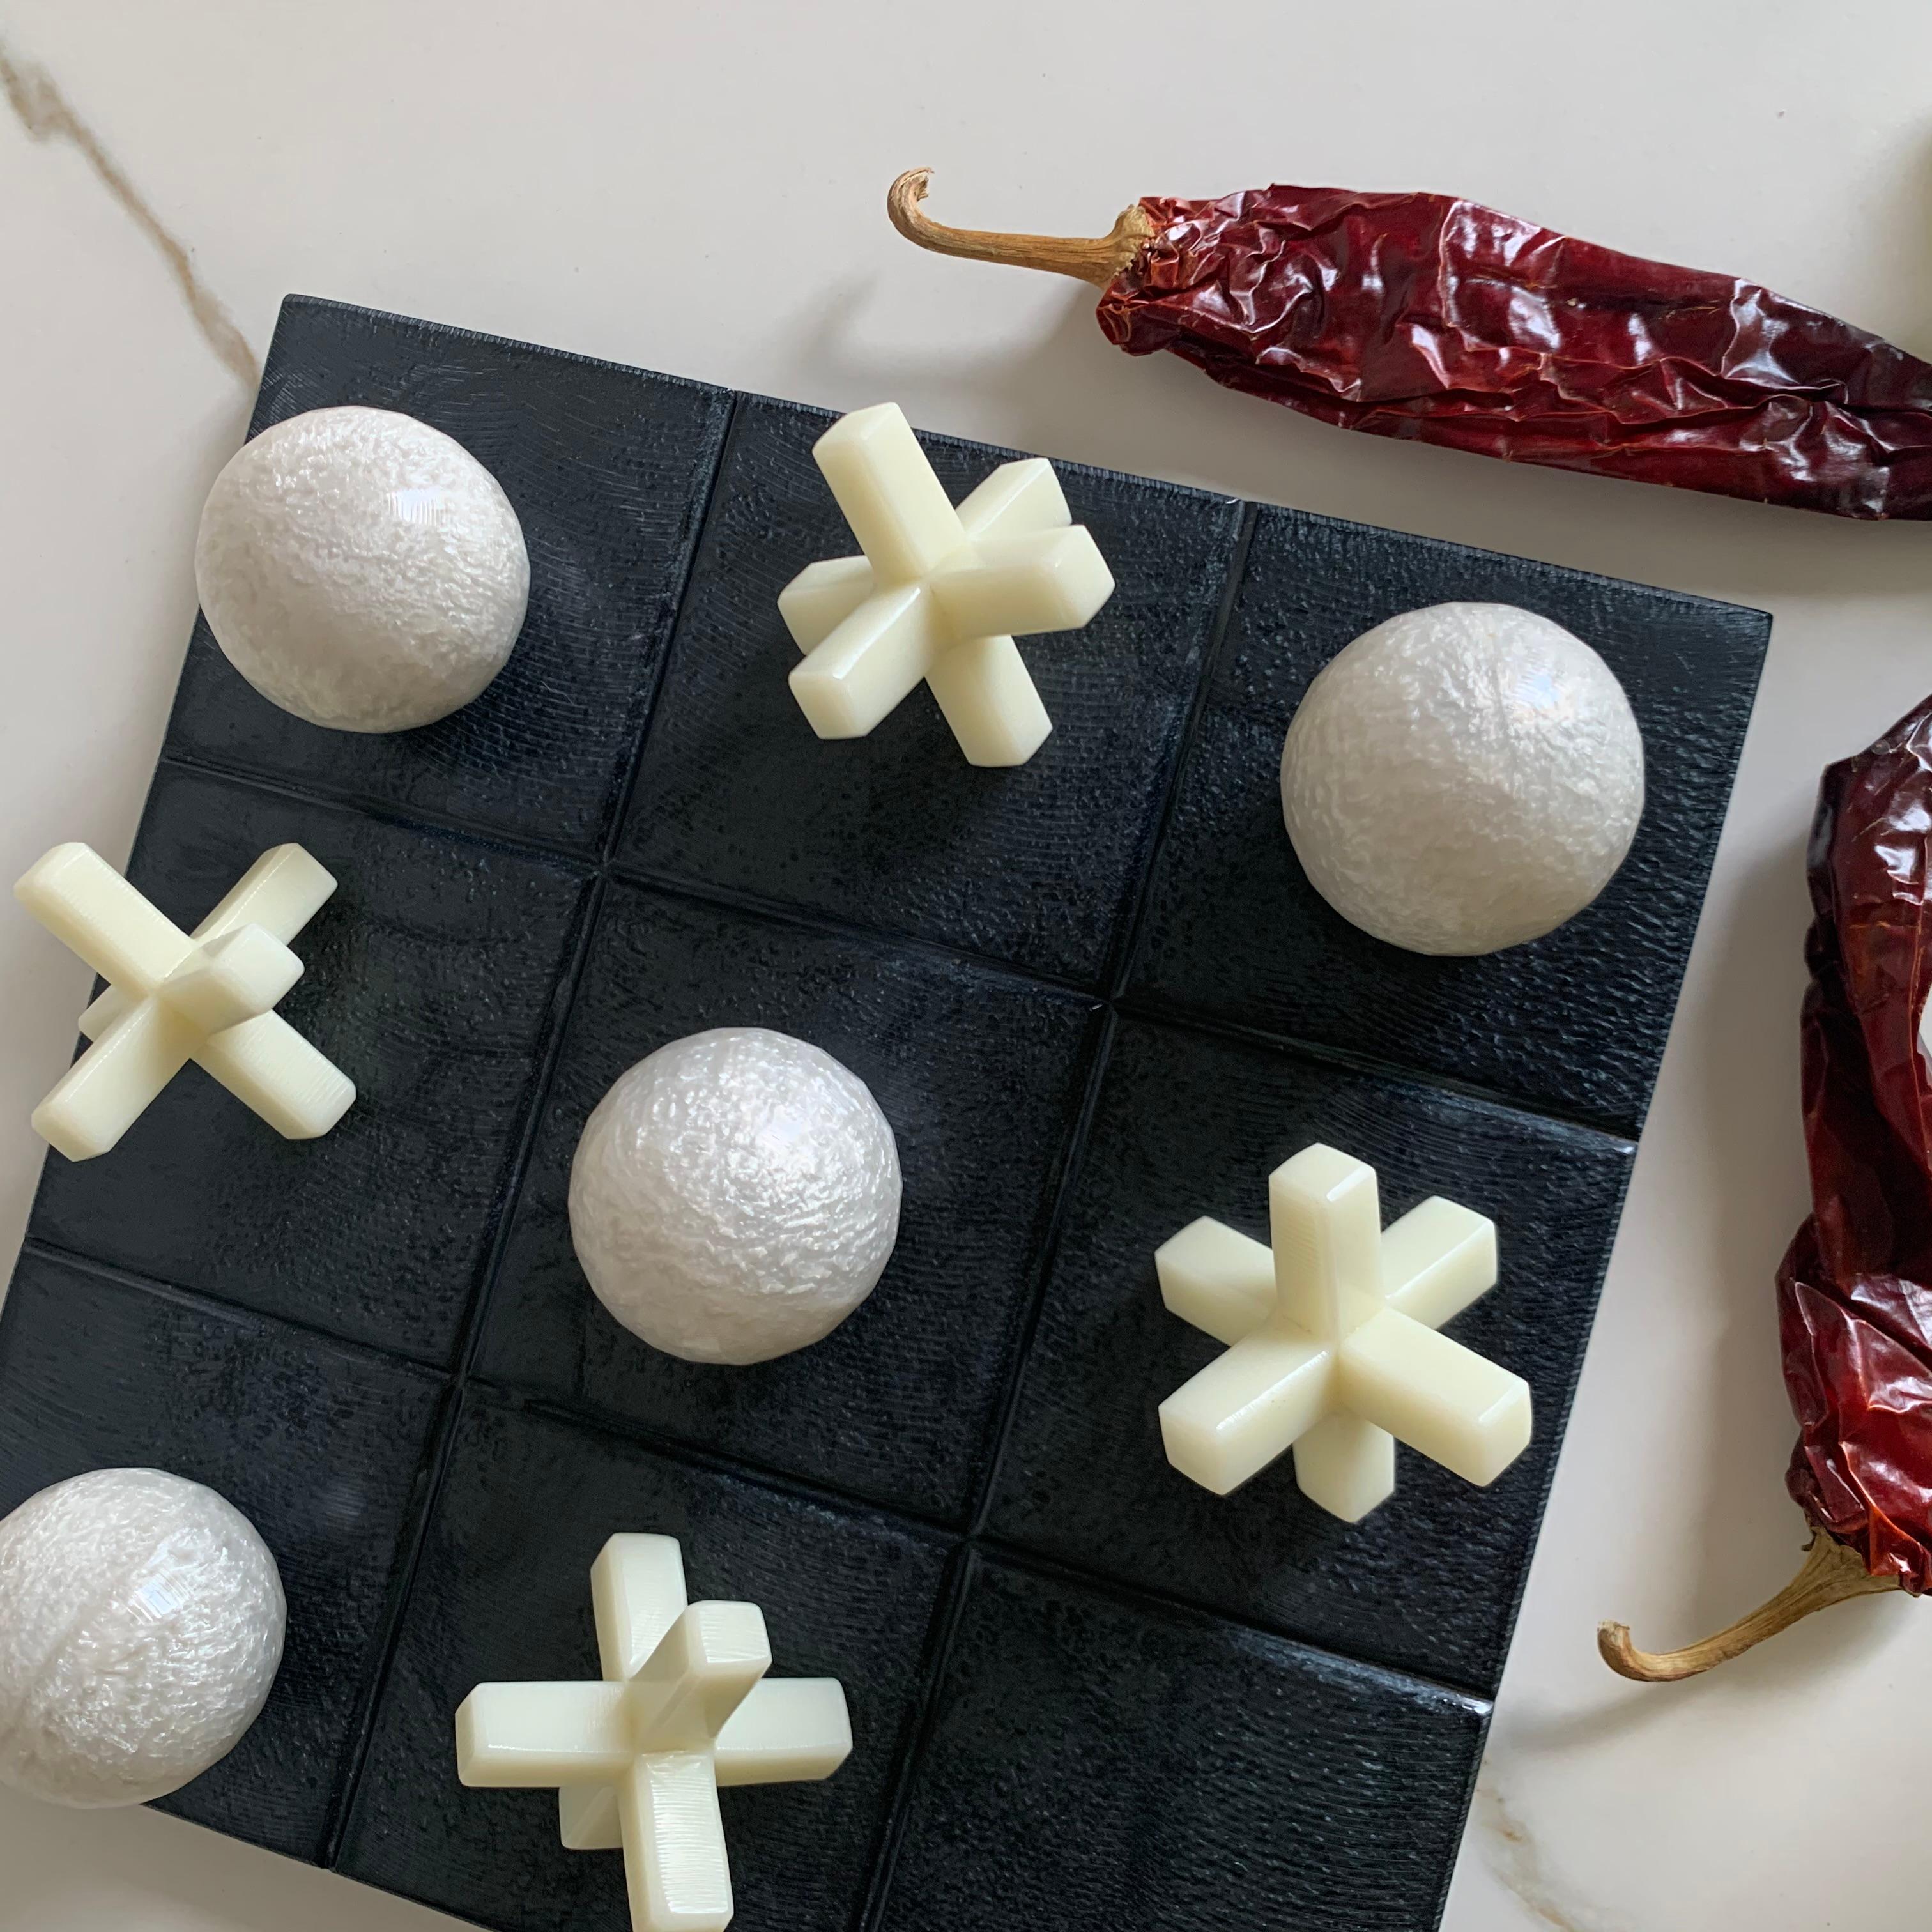 Our Tic Tac Toe is a beautiful, modern and fun take on the classic game. The three dimensional pieces are handmade in white pearl resin, and board is in black pearl resin. It will be the coolest statement piece on any coffee table.

Materials: